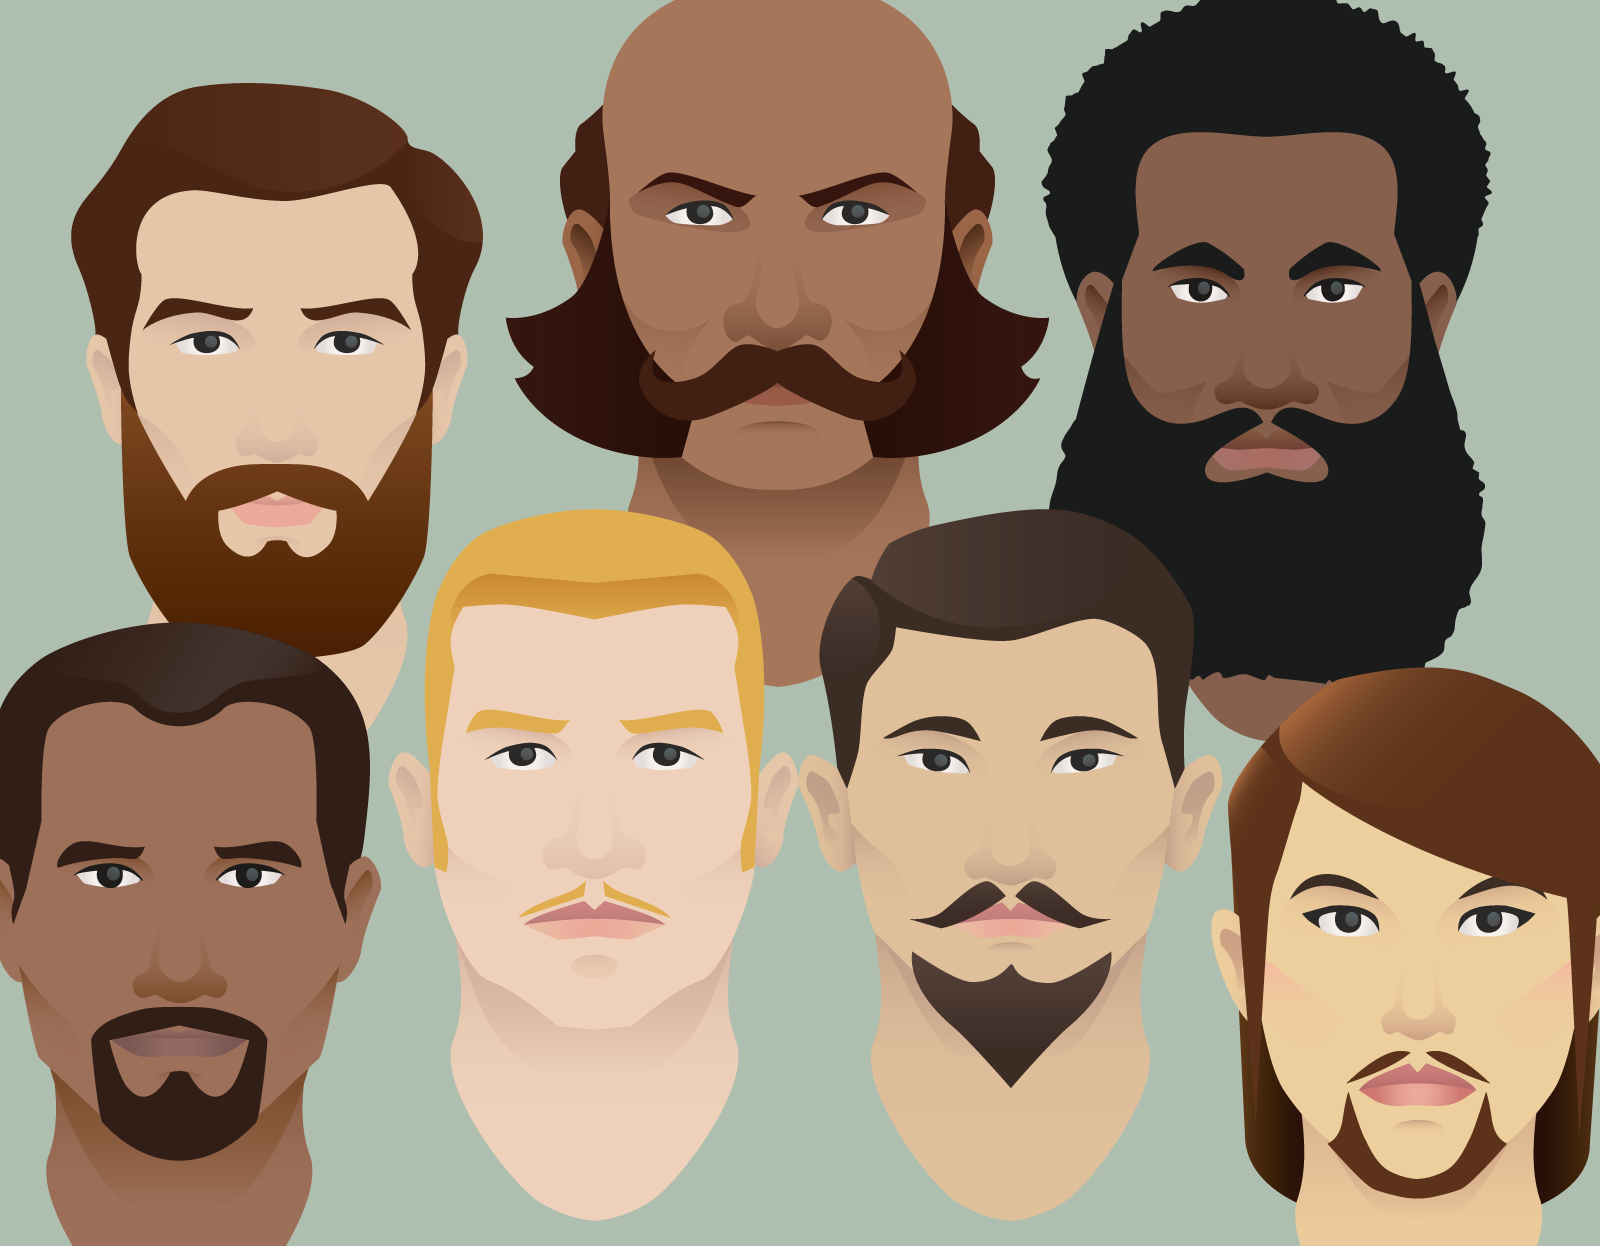 Several illustrated people sporting stylish beards.